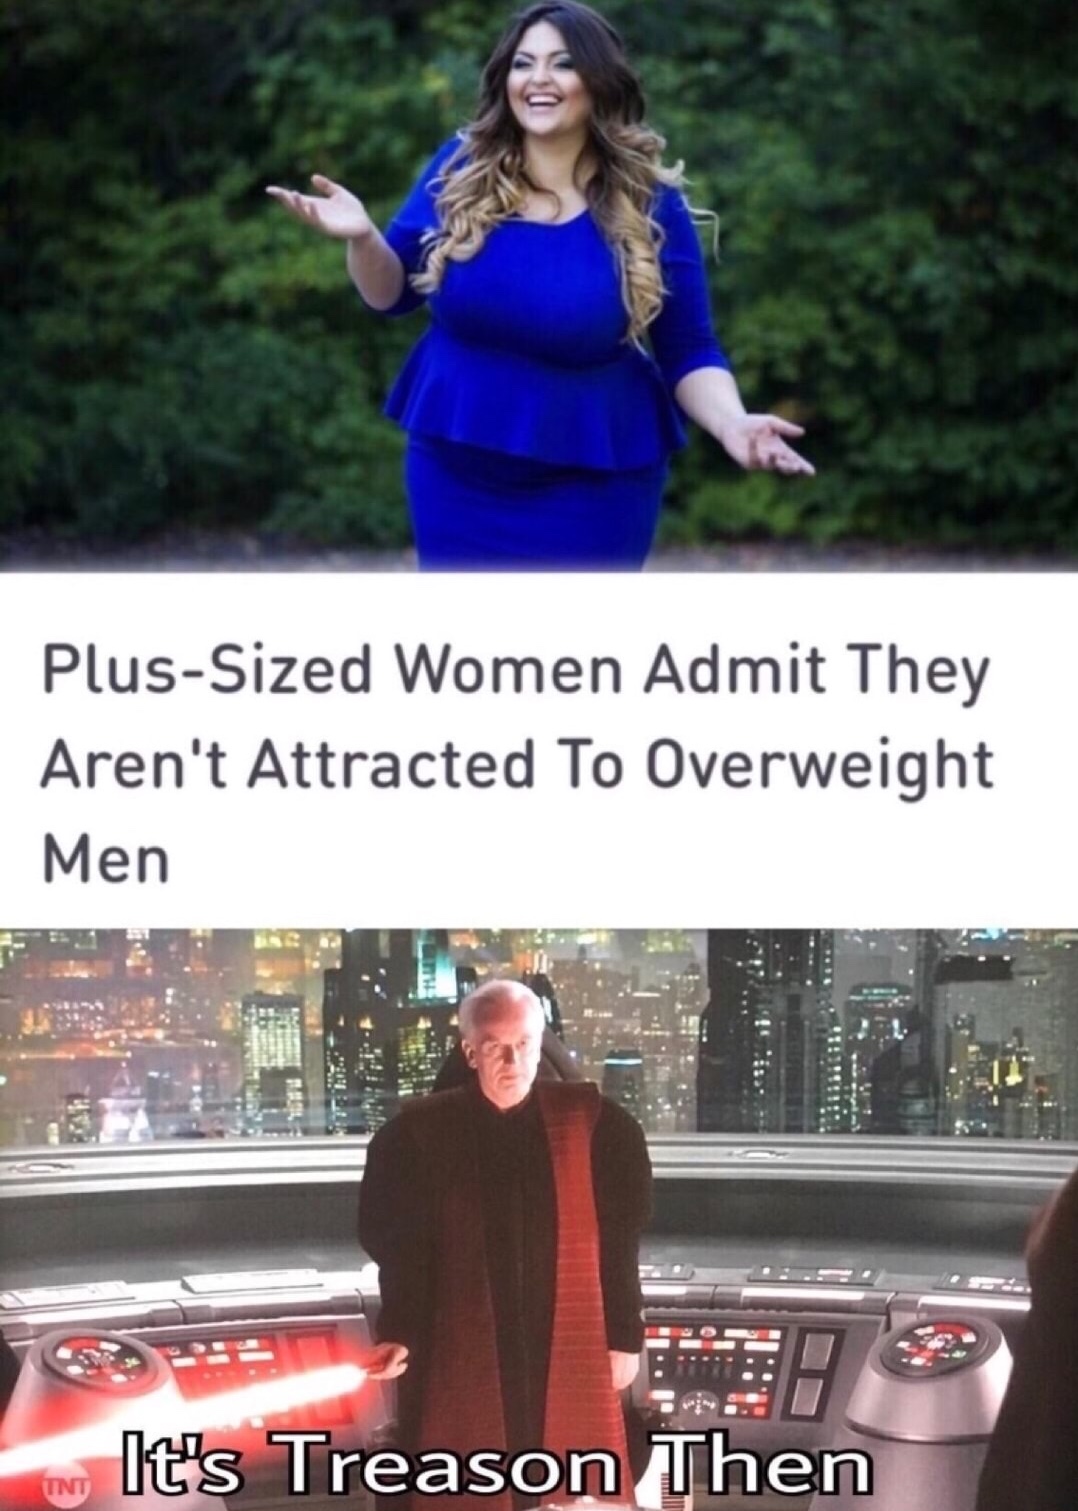 plus sized women admit they aren t attracted to overweight men - PlusSized Women Admit They Aren't Attracted To Overweight Men ..22 0 It's Treason Then